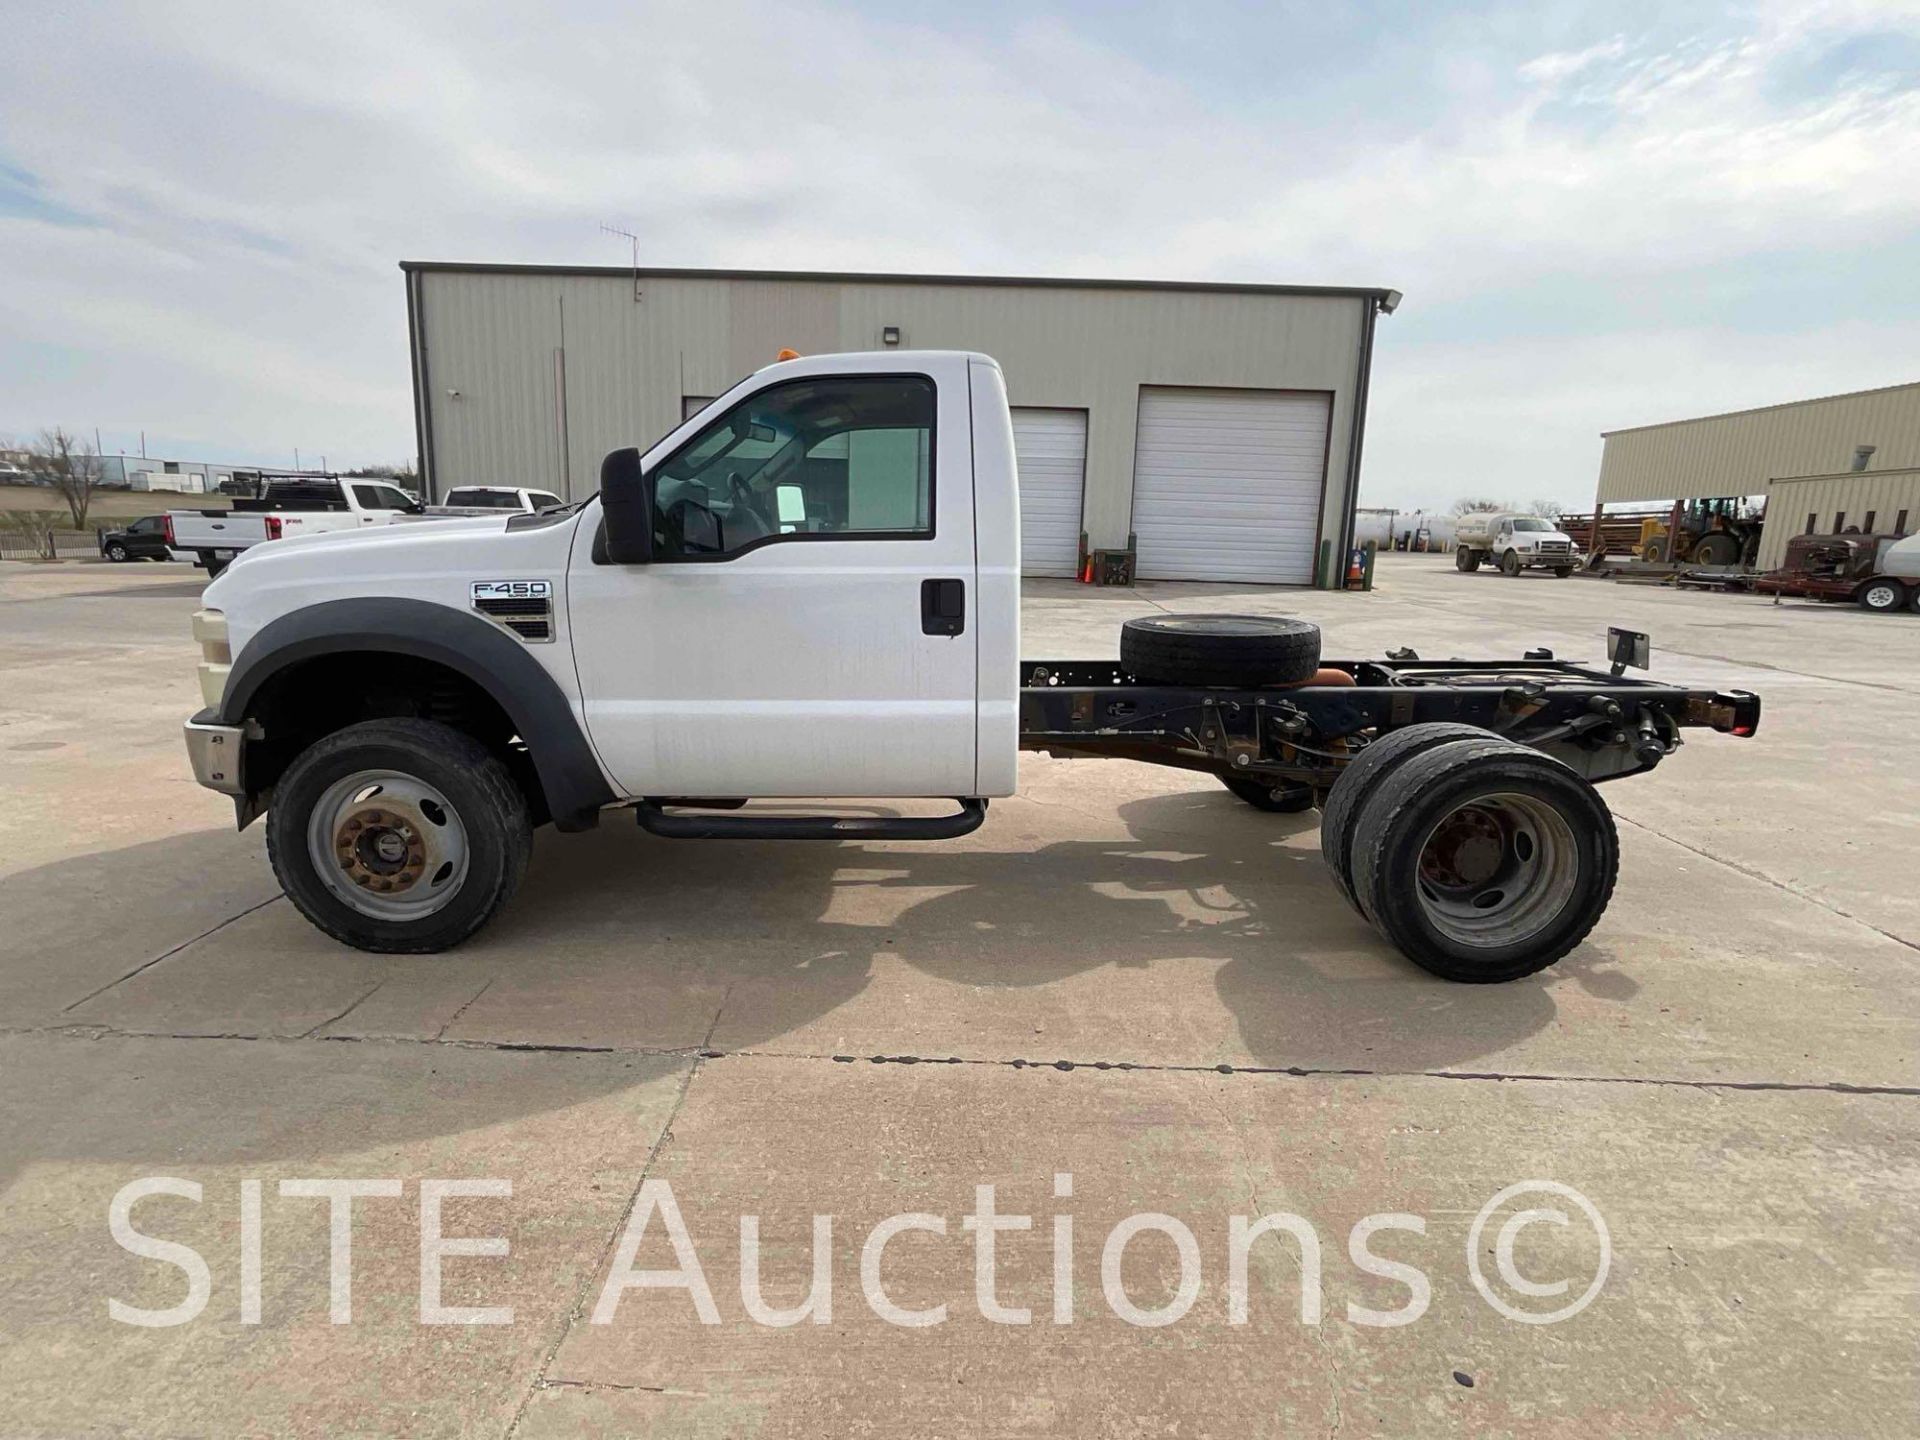 2010 Ford F450 SD Cab & Chassis Truck - Image 8 of 20